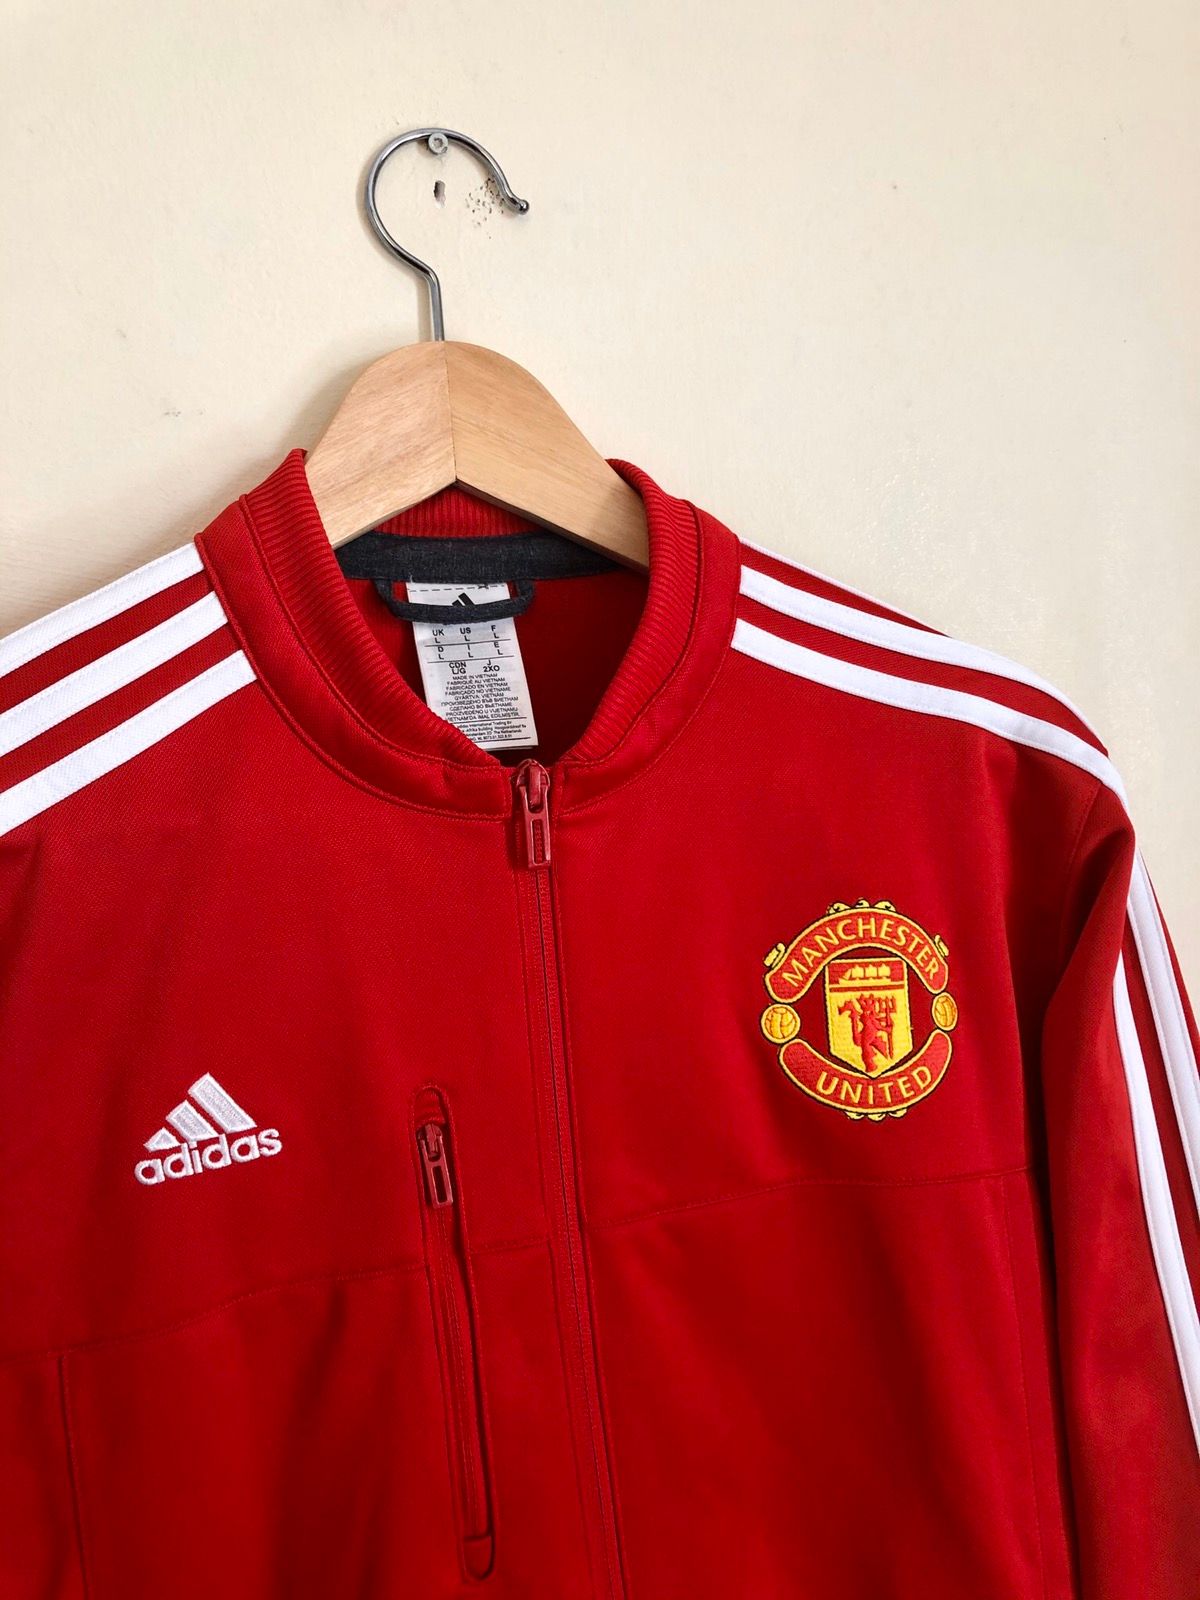 Adidas Adidas x Manchester United football track jacket Size US L / EU 52-54 / 3 - 2 Preview